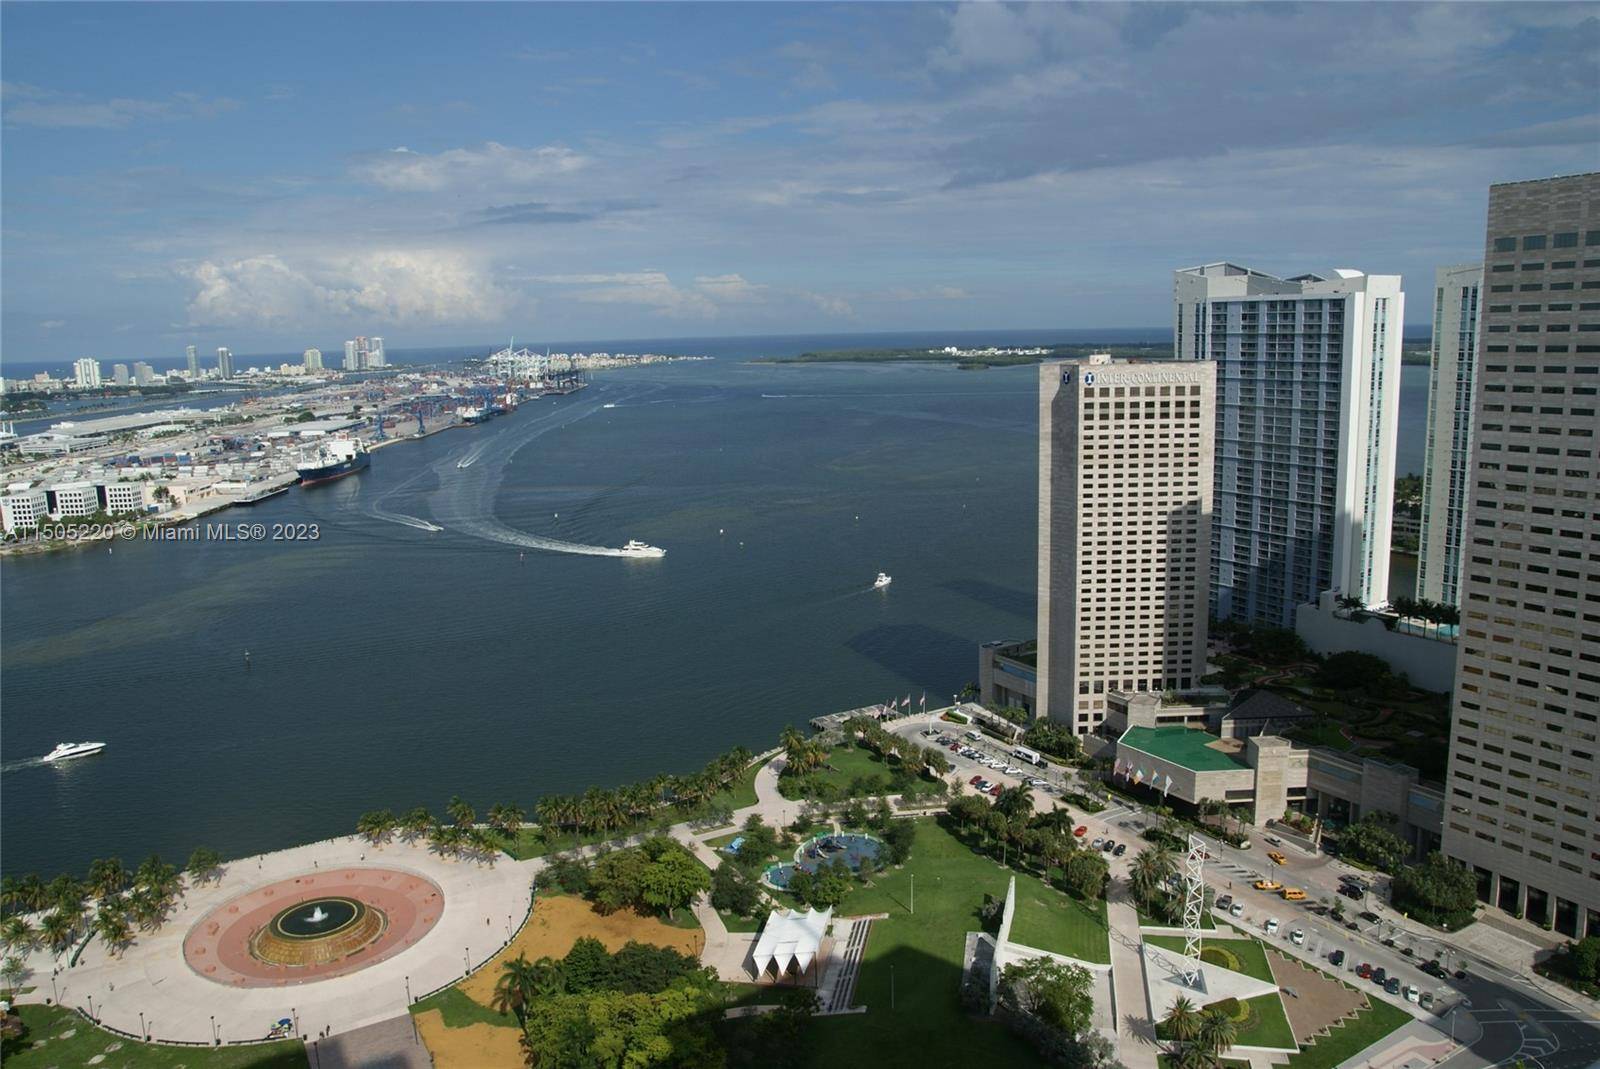 Beautiful corner unit, 3 Beds 2 Baths condo walking distance from Kaseya Arena, Biscayne Bark, Bayside, Restaurants, Whole Foods, Frost and Perez museum and much more.